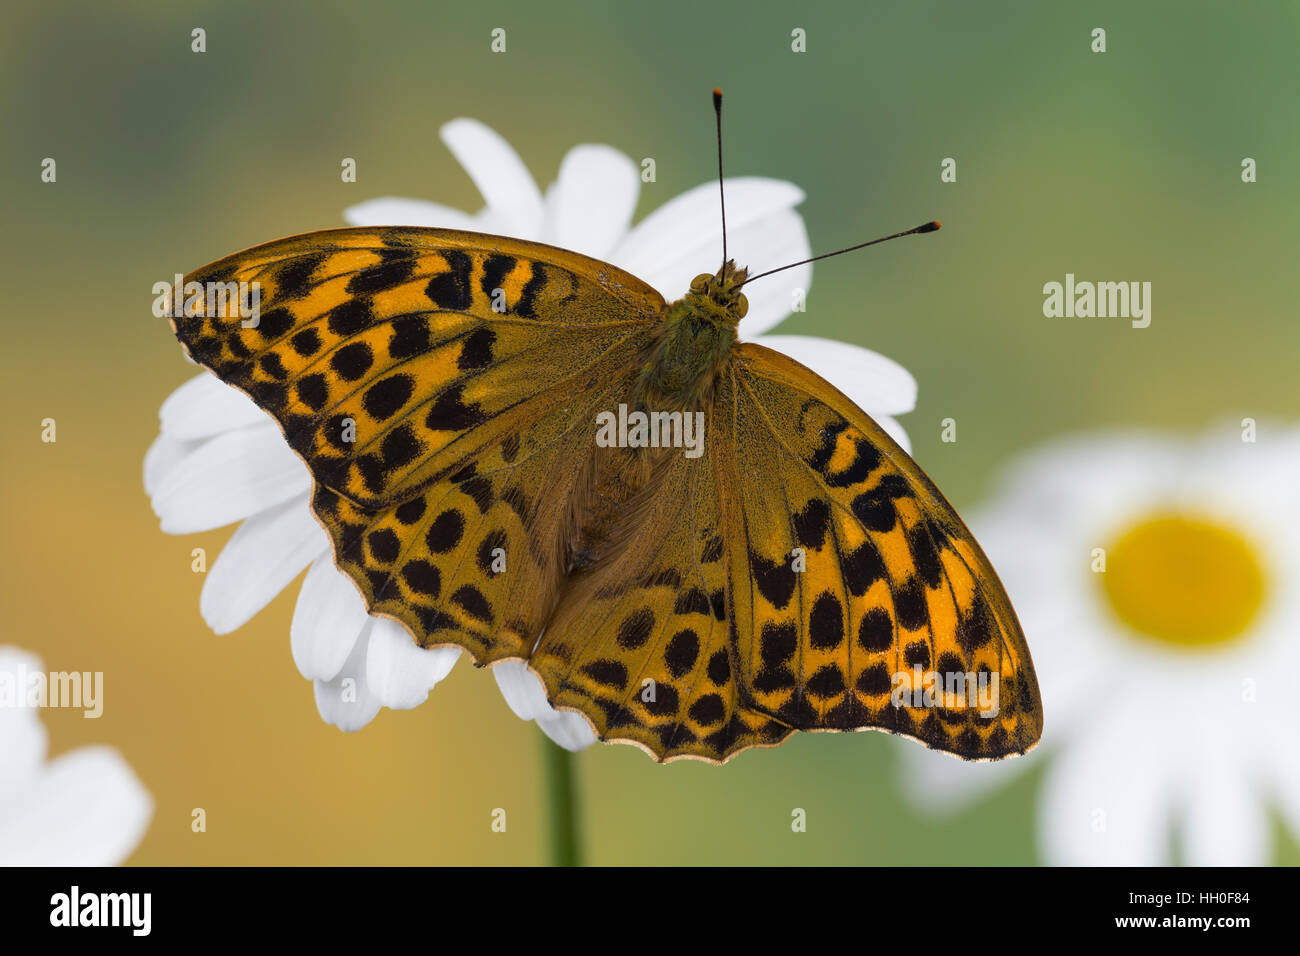 Kaisermantel, Weibchen, Silberstrich, Argynnis paphia, Silver-washed fritillary, female, Le Tabac d'Espagne, Edelfalter, Nymphalidae Stock Photo